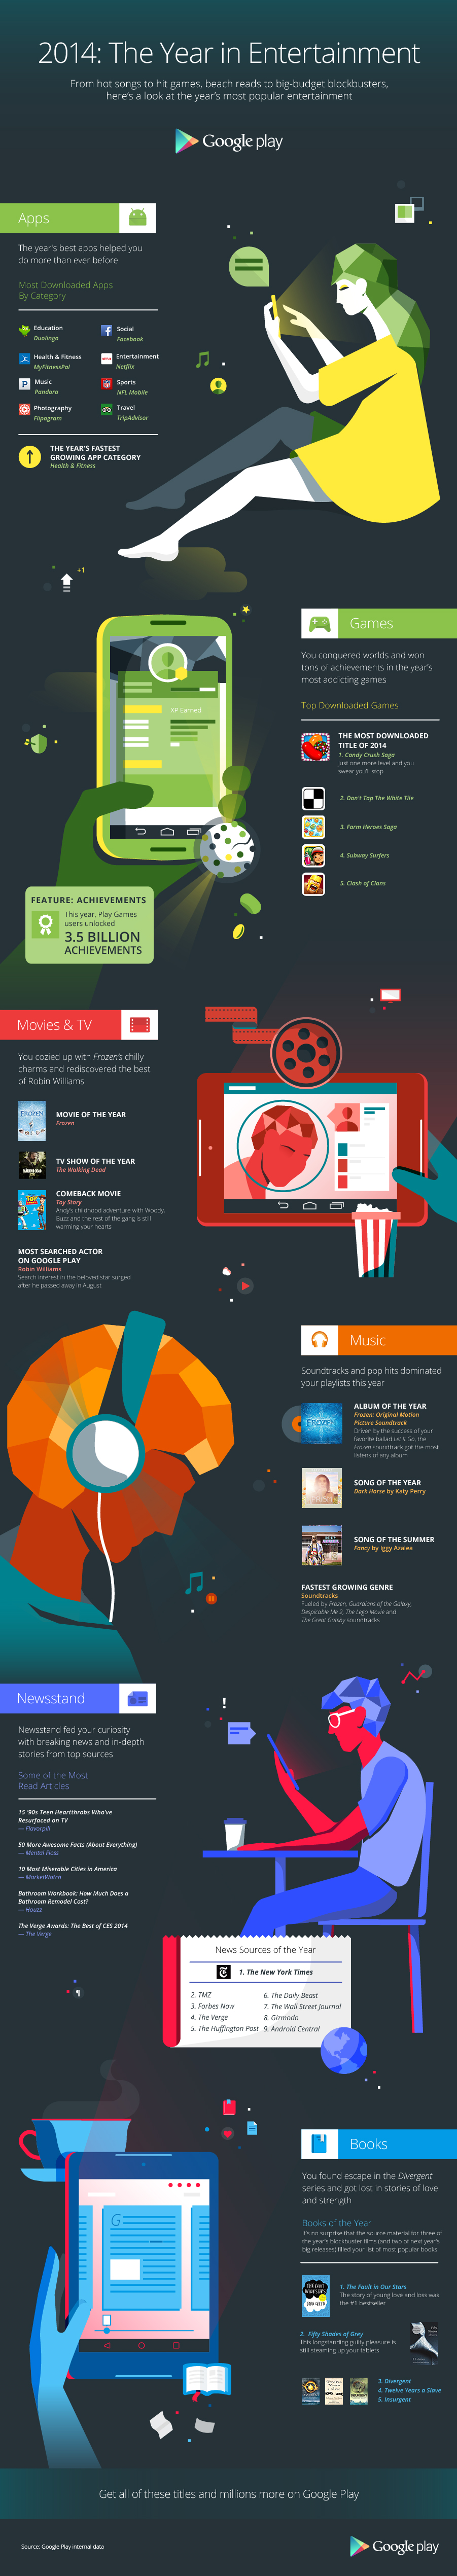 Google-Play-End-of-Year-Infographic-2014-FINAL